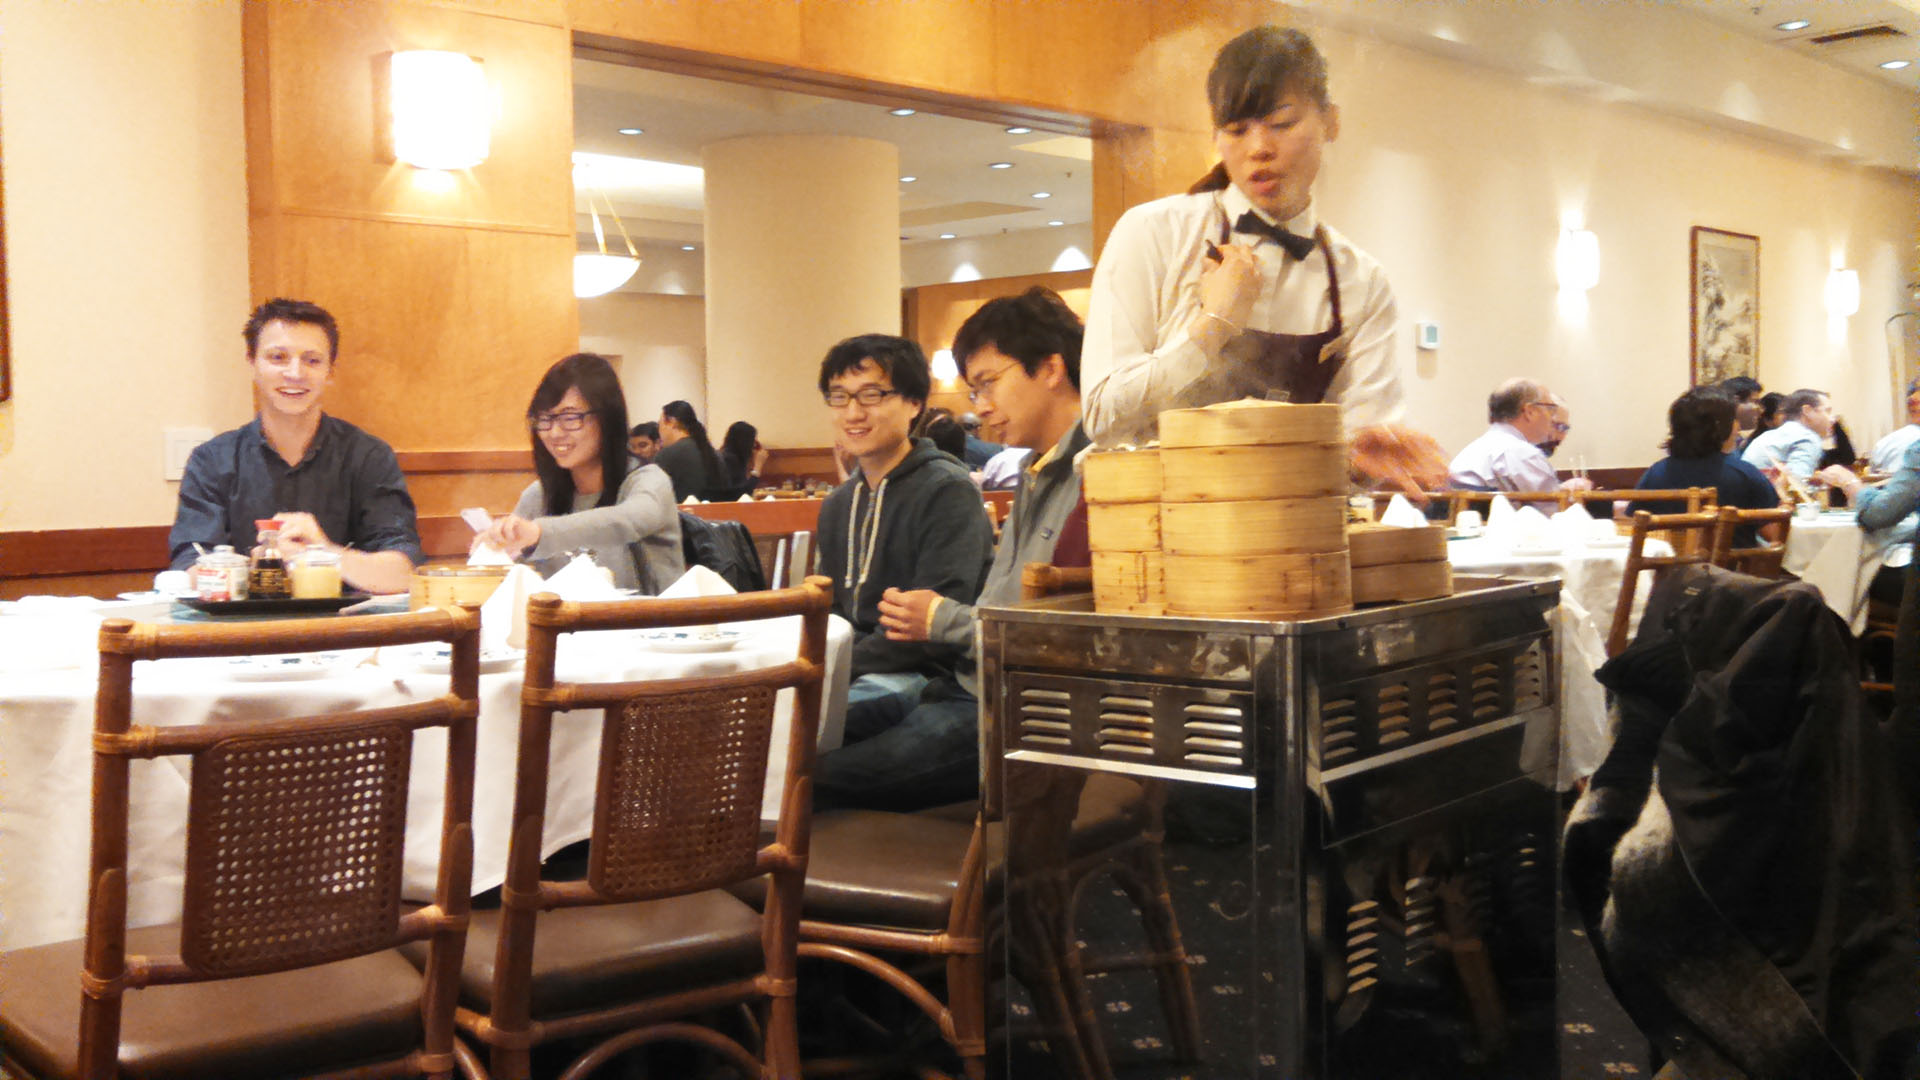 The servers at Yank Sing push a trolley with dumpling options